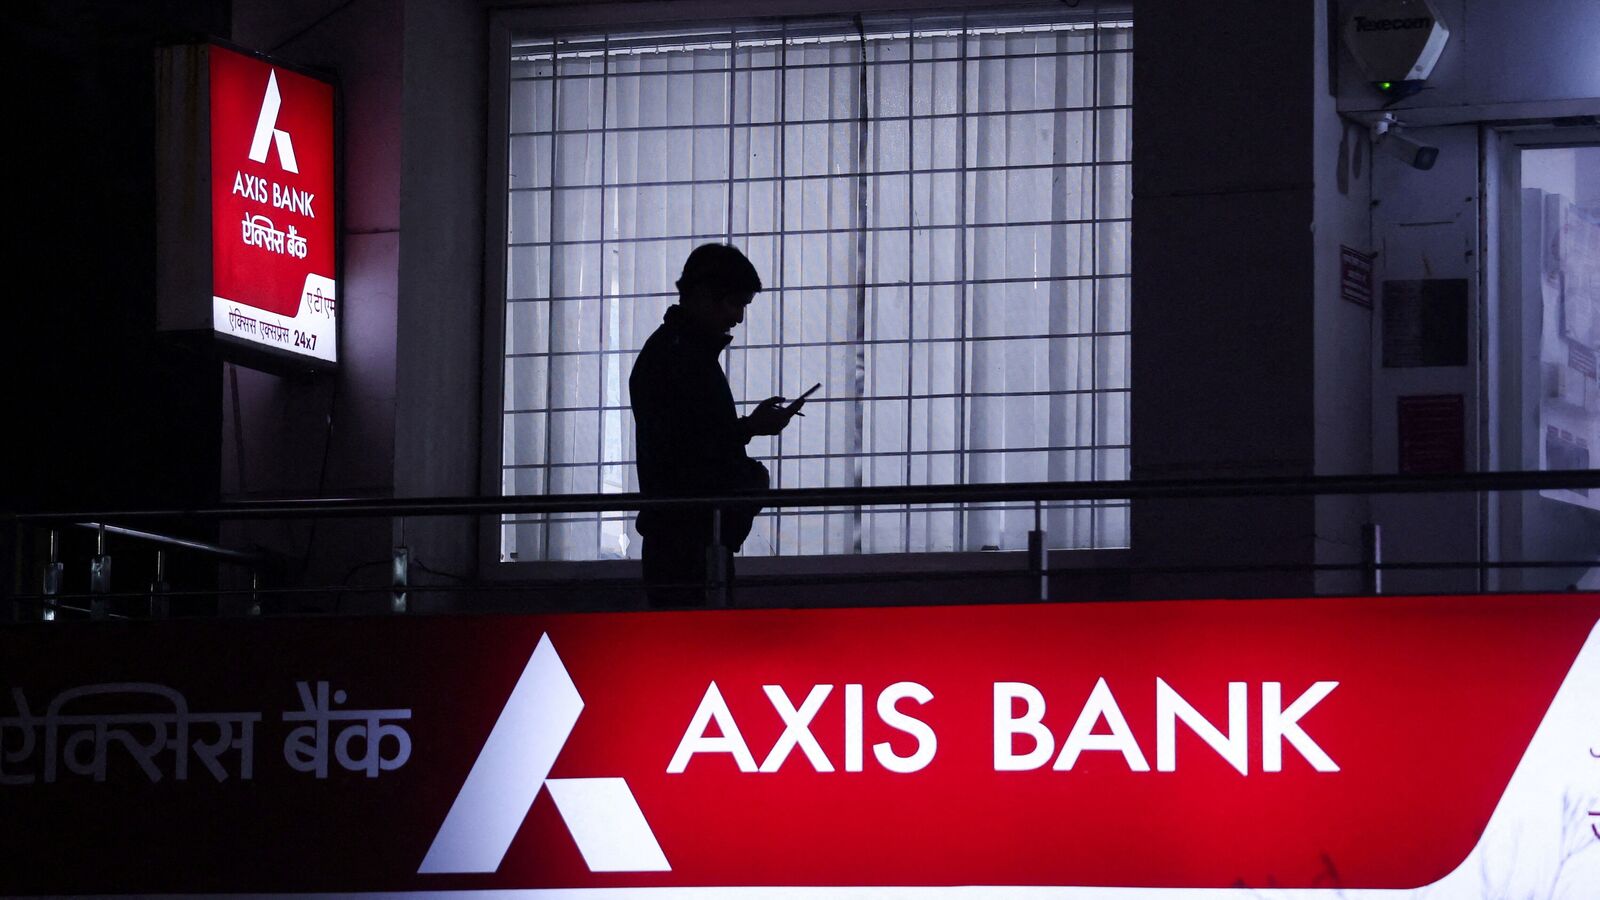 Axis Bank vs ICICI Bank: Which is the best Indian banking stock?